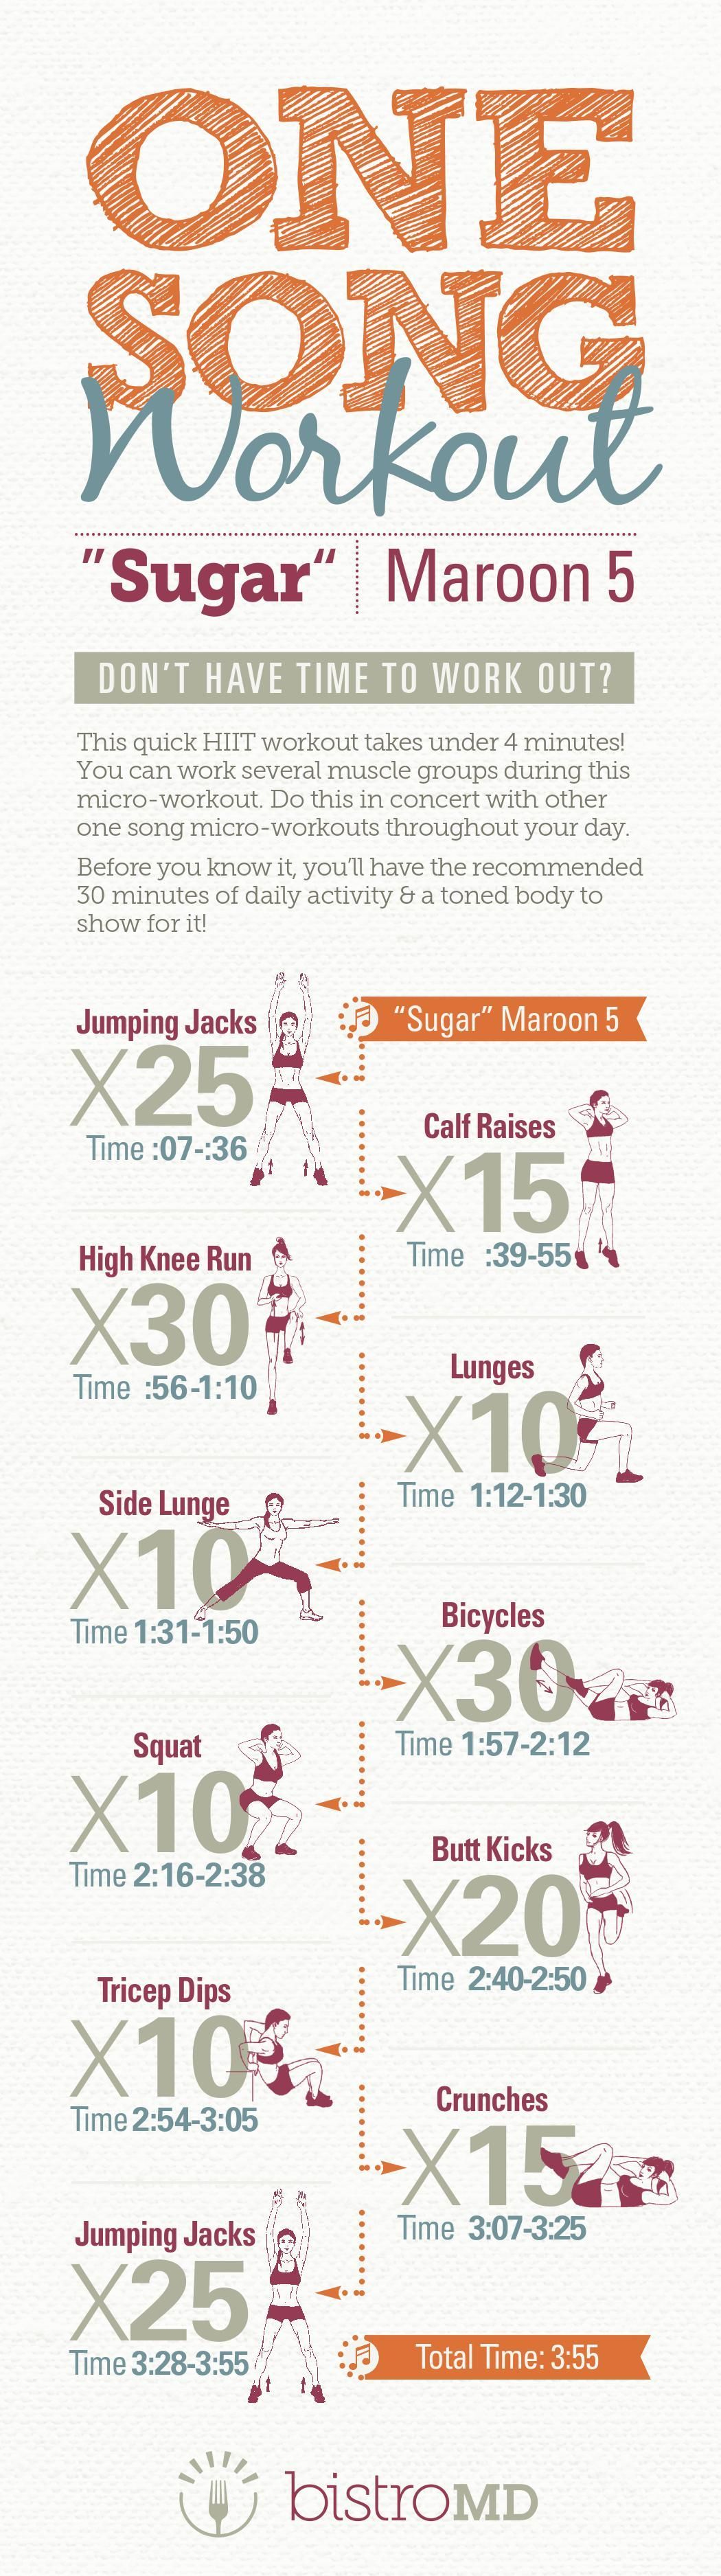 Workout a variety of muscle groups in under 4 minutes with this fun HIIT (high intensity interval training) workout to Maroon 5s